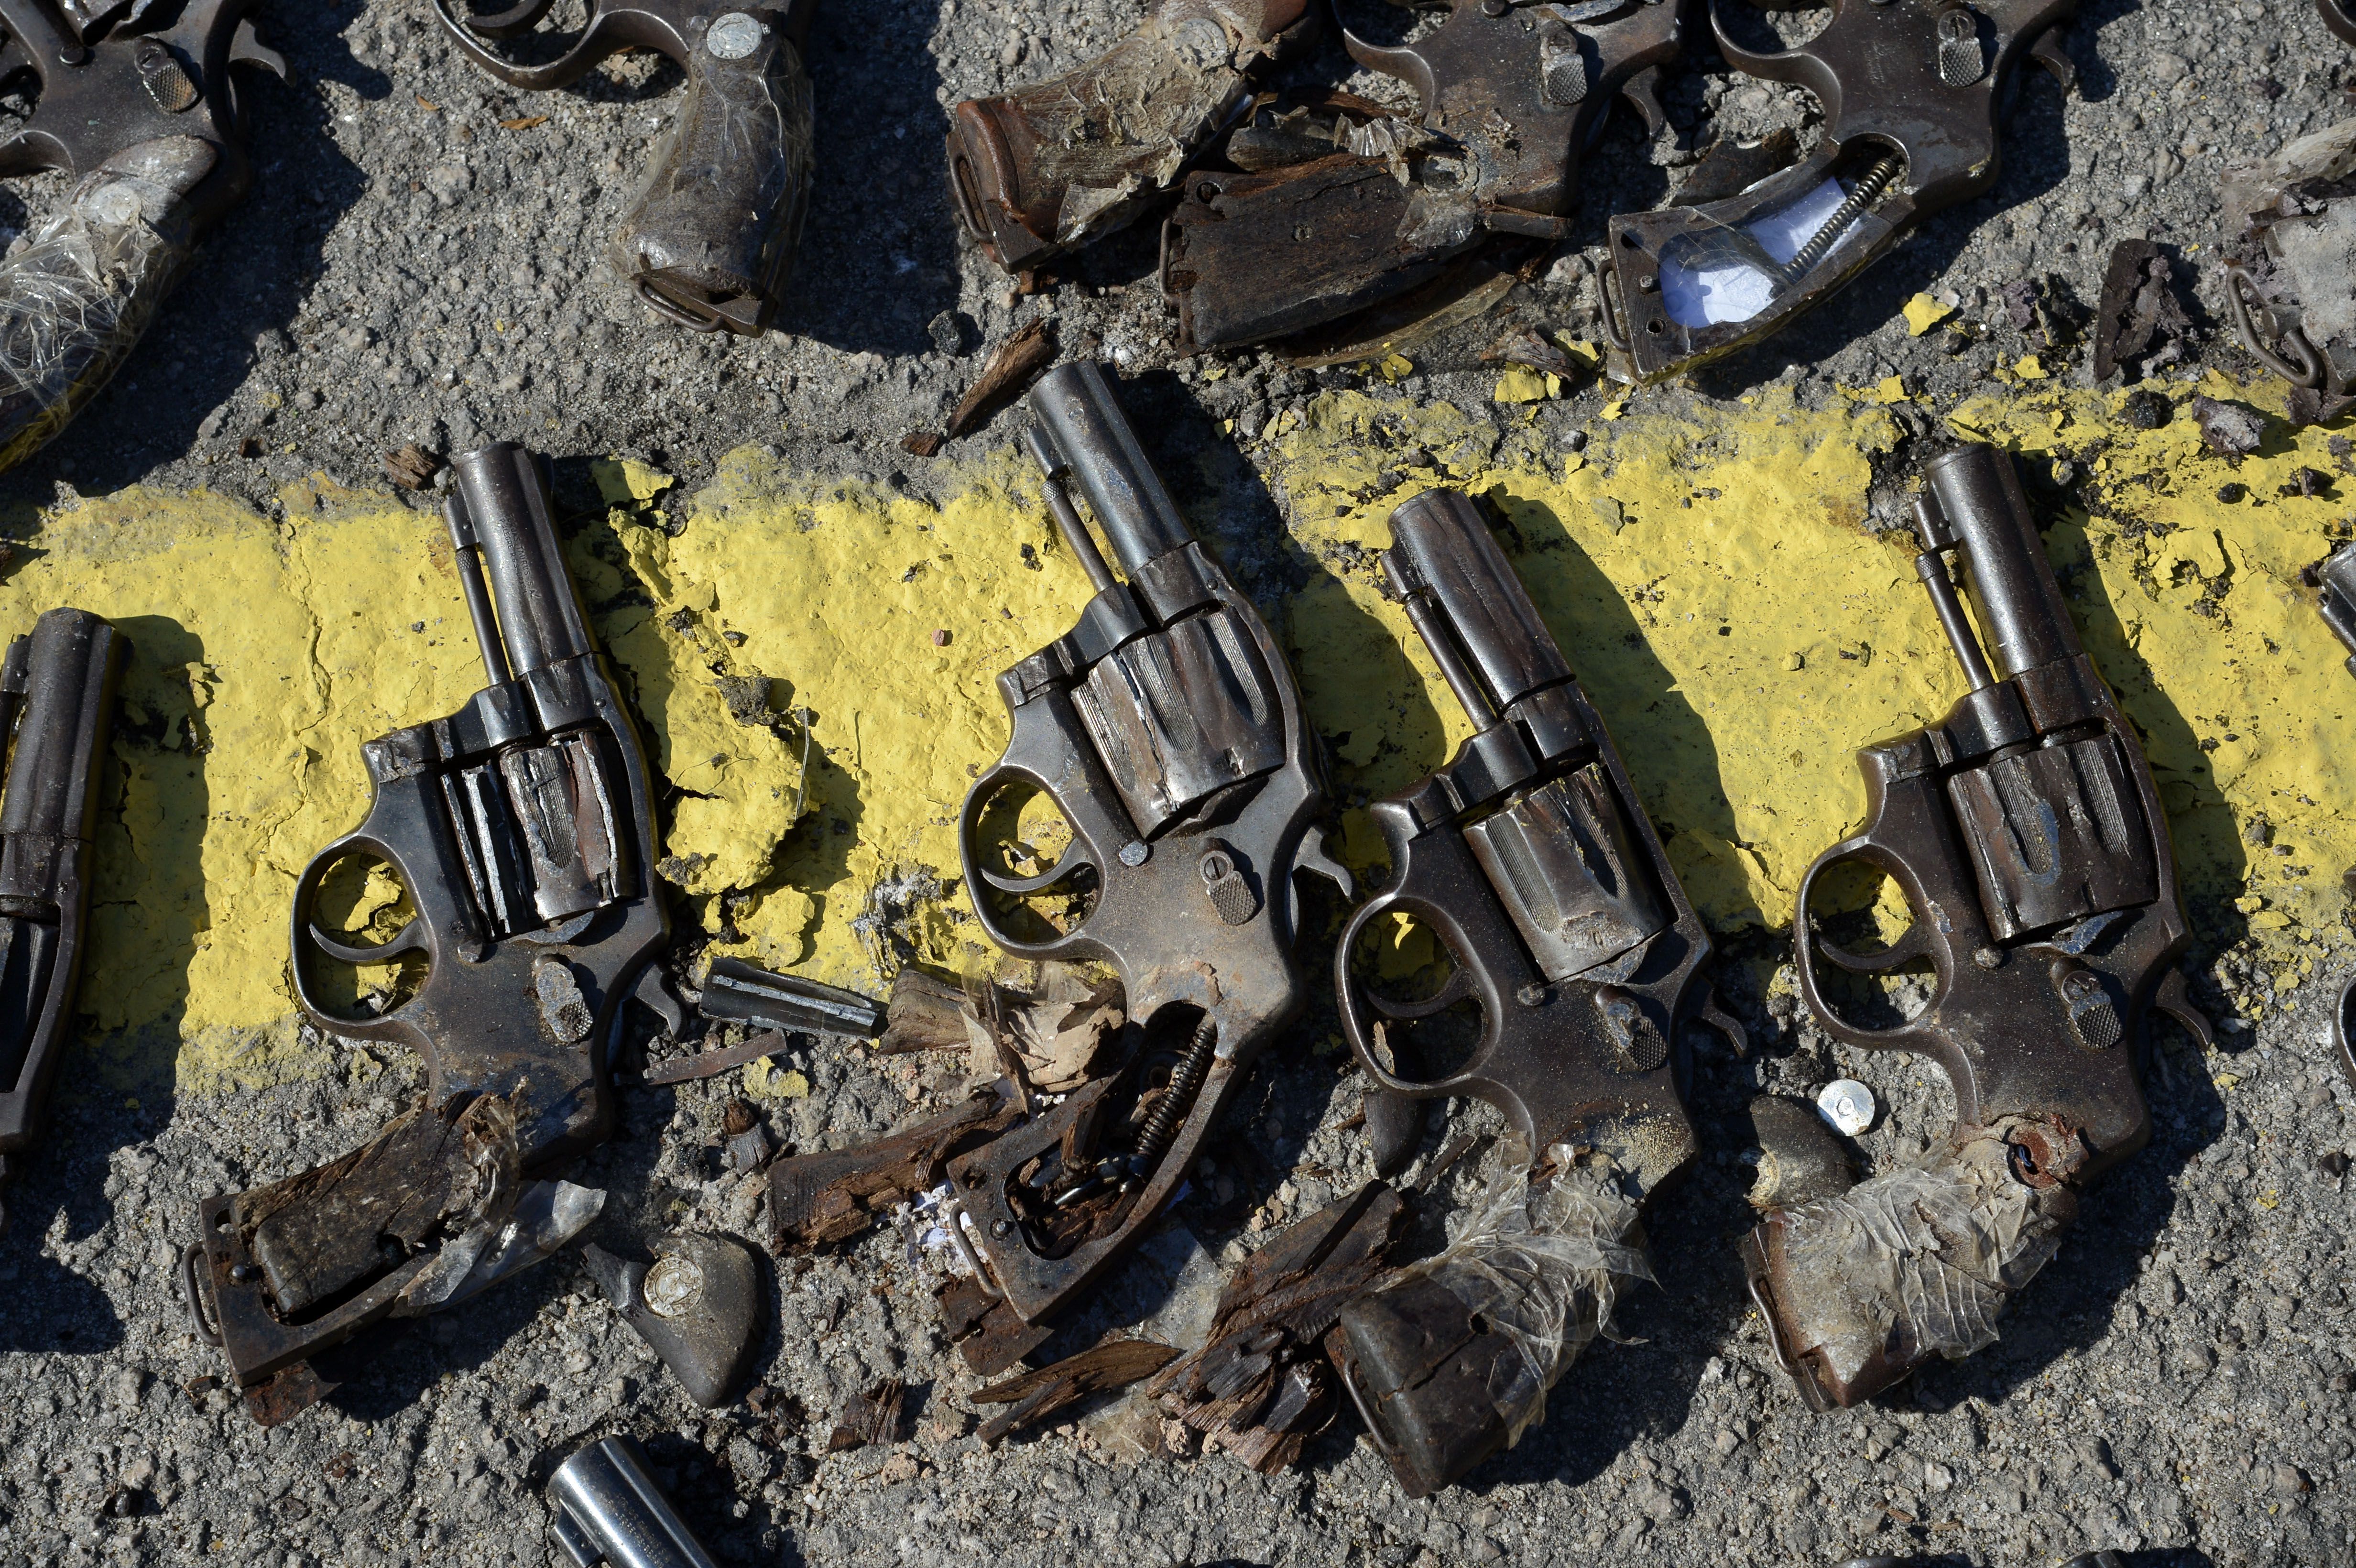 Obsolete and unusable weapons taken to be destroyed by the Army. Photo: Tânia Rego/Agência Brasil)